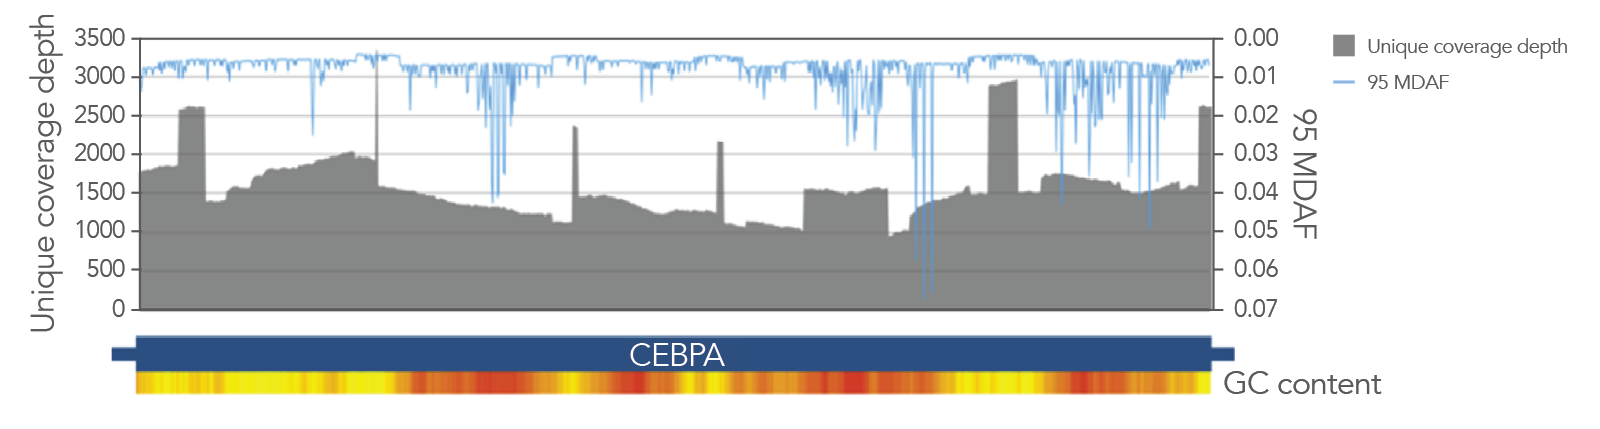 Excellent coverage of CEBPA with VARIANTPlex™ Core Myeloid panel, with 95 MDAF plotted overall.